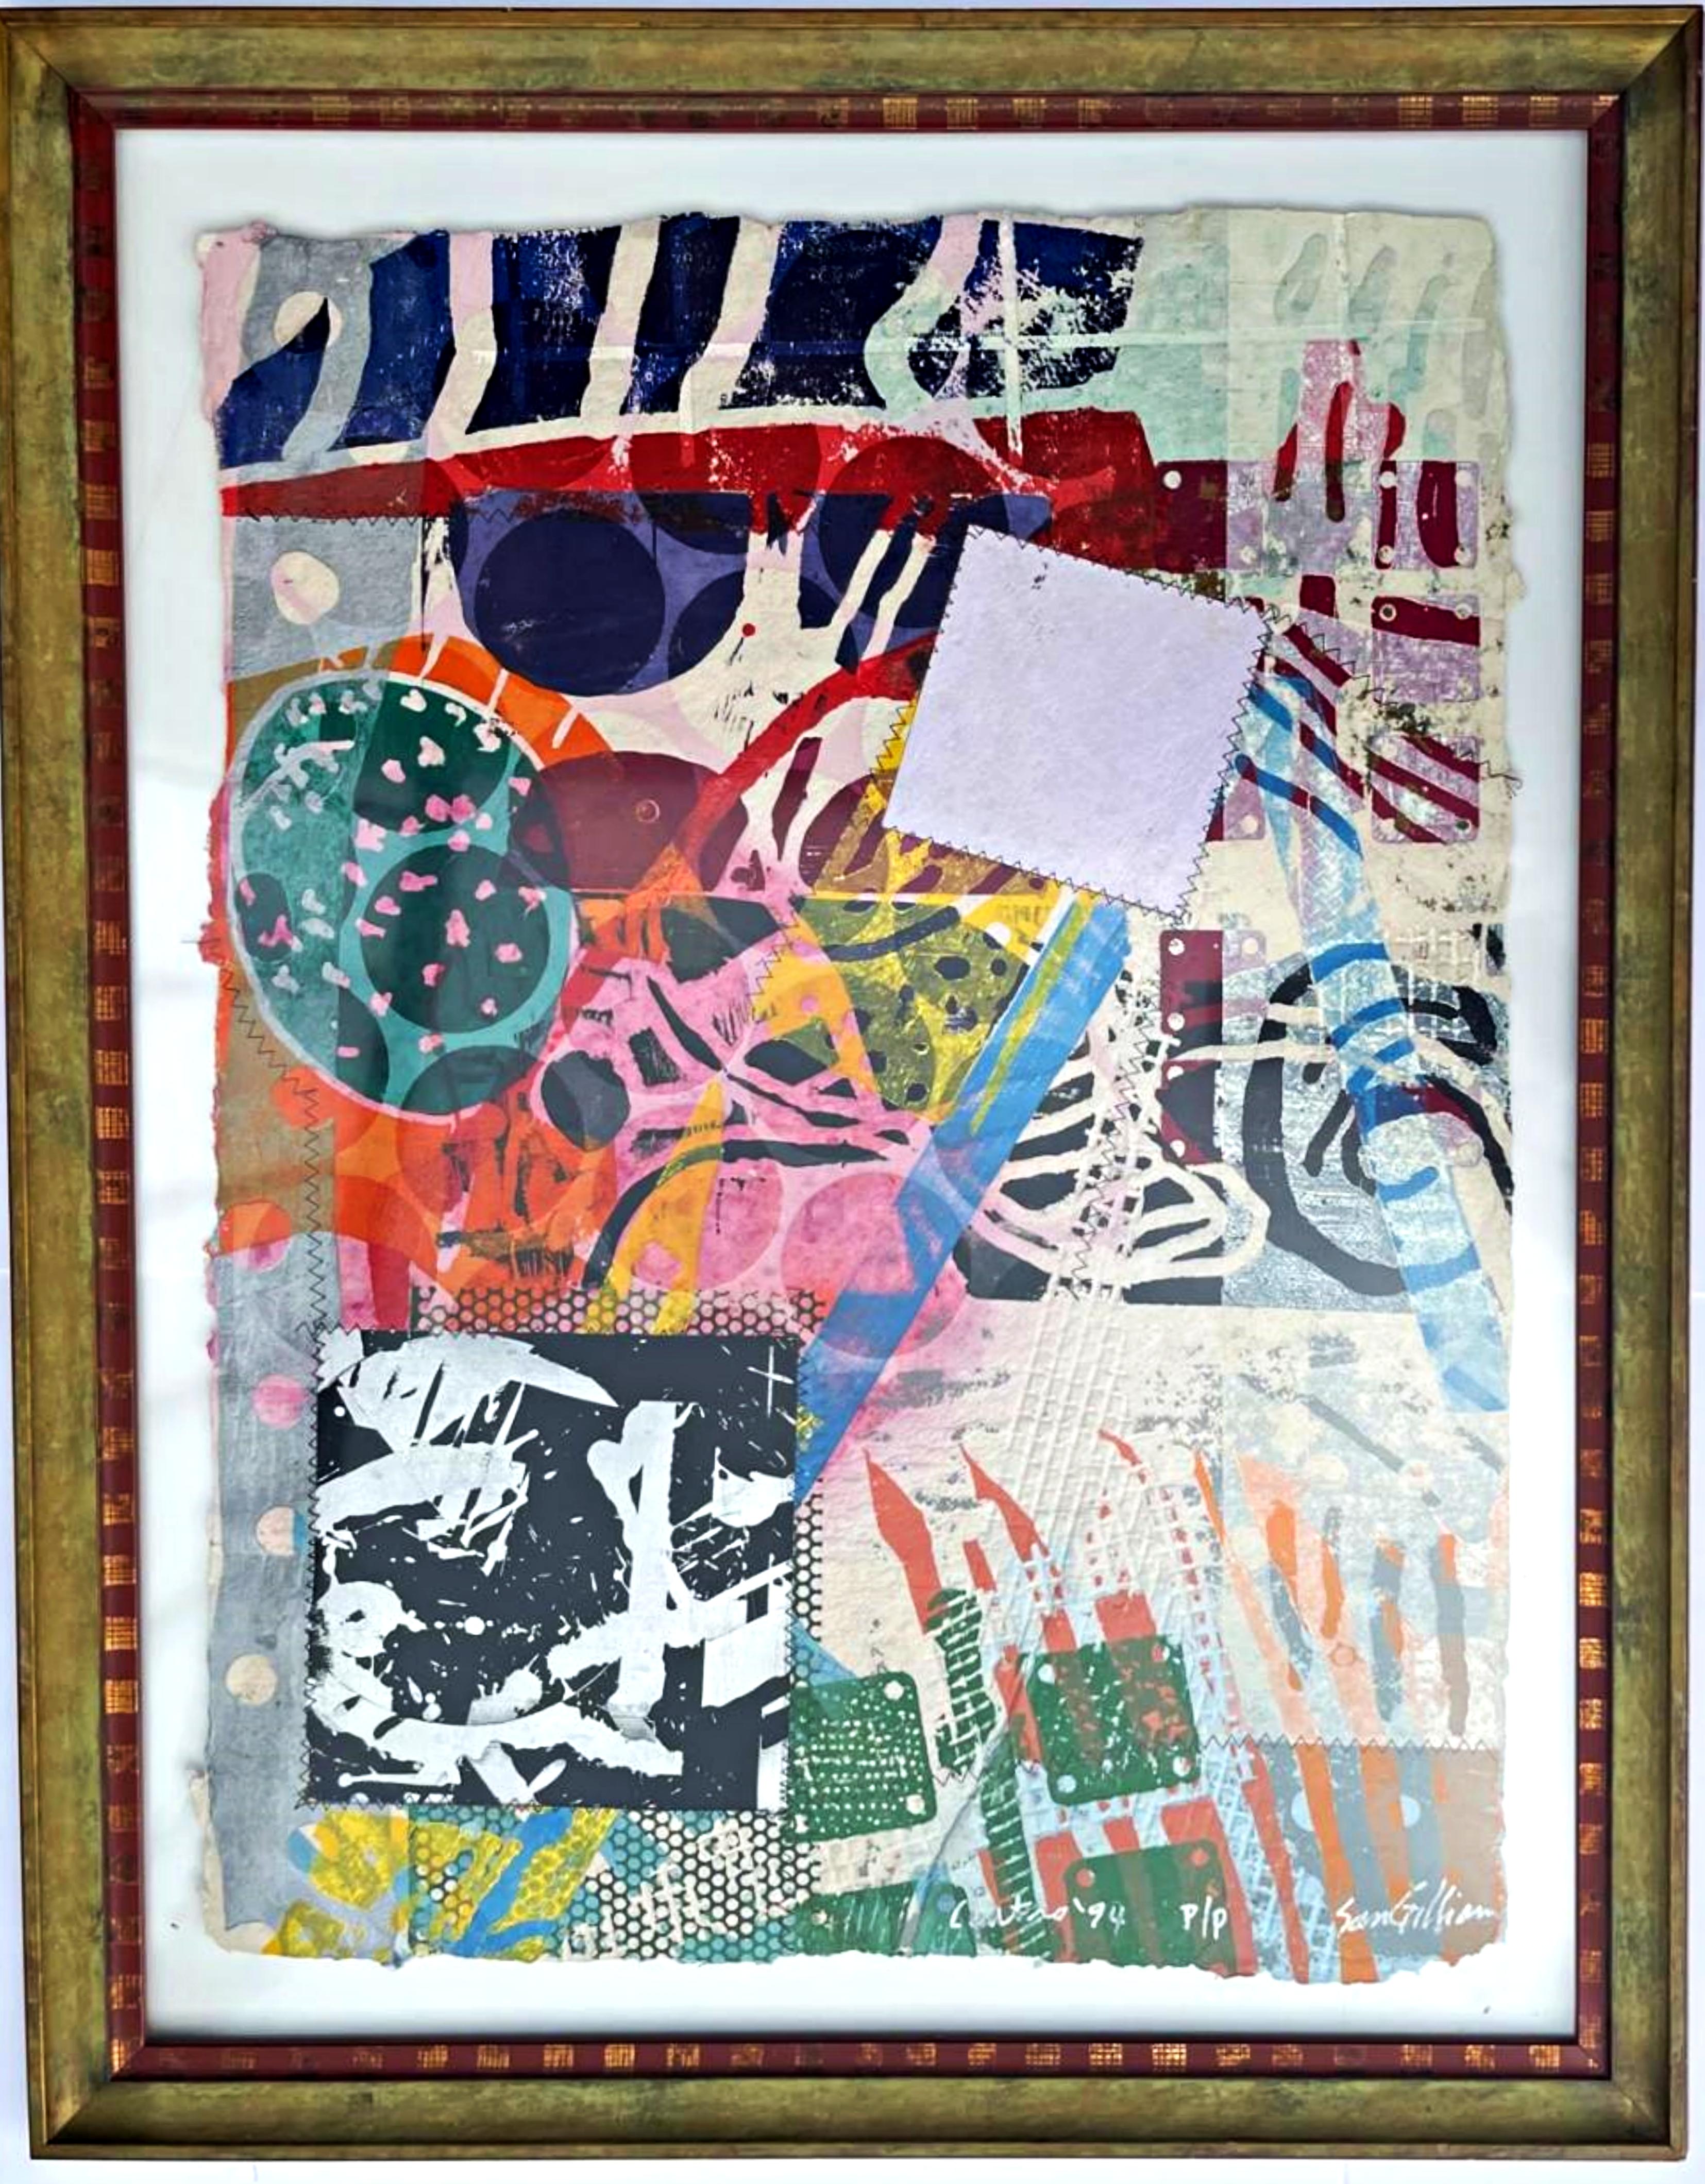 Cuatro (Monoprint with screenprint, collage, acrylic, stitching and embossing) - Mixed Media Art by Sam Gilliam